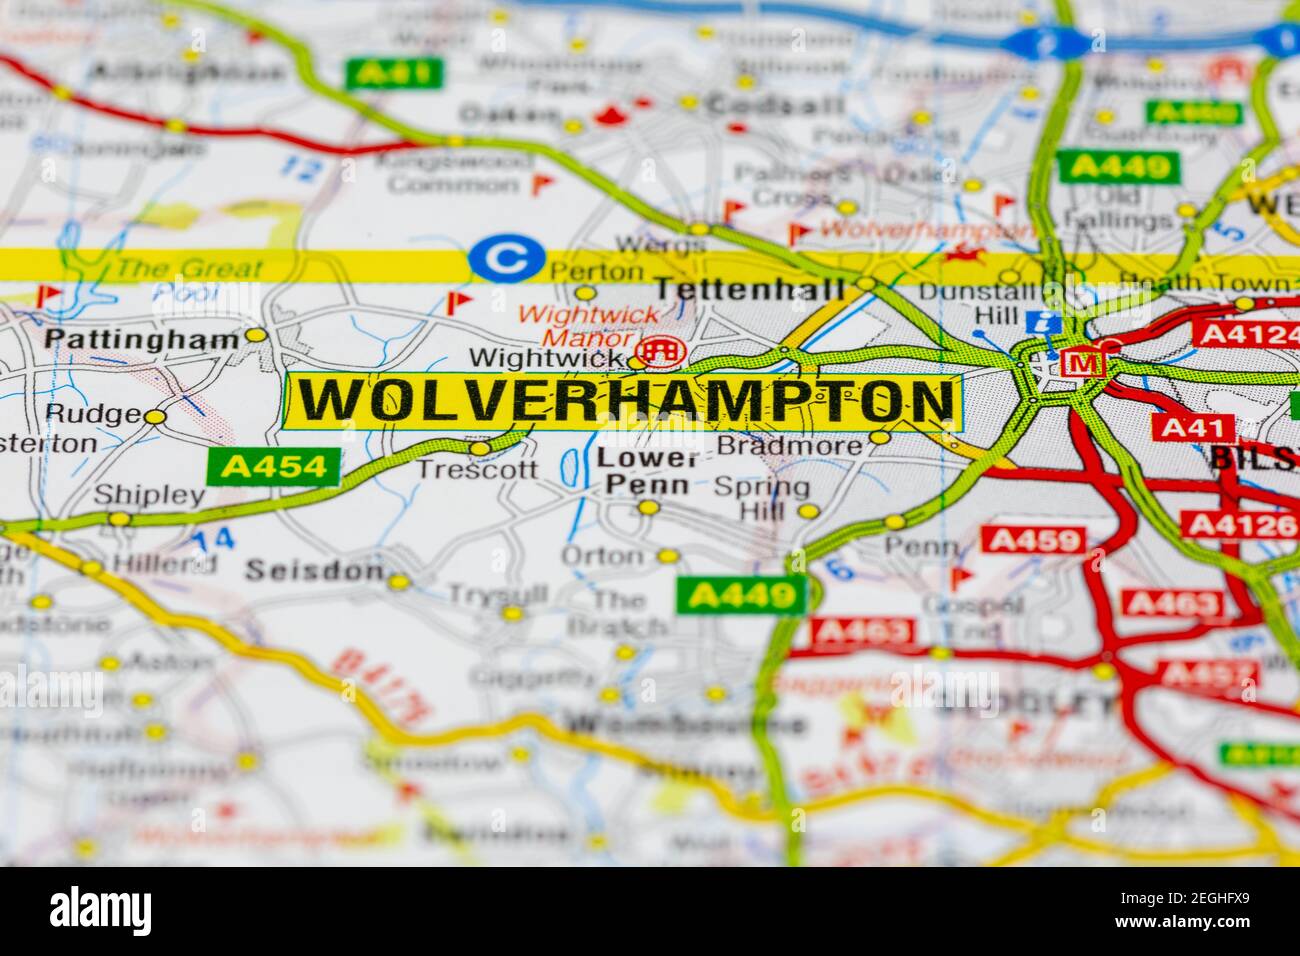 Wolverhampton and surrounding areas shown on a road map or geography map Stock Photo